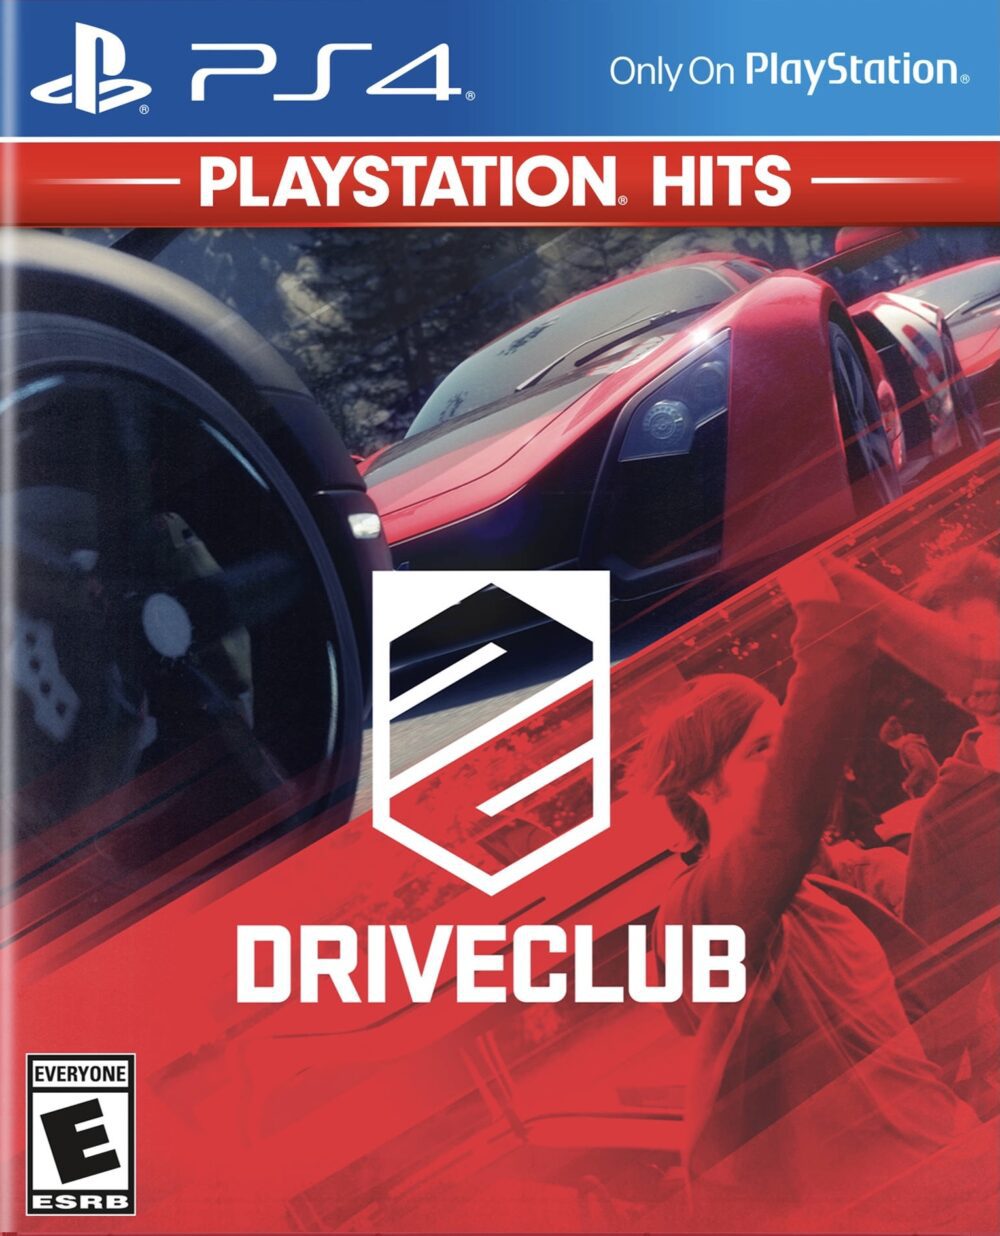 Driveclub (PlayStation Hits) for PS4